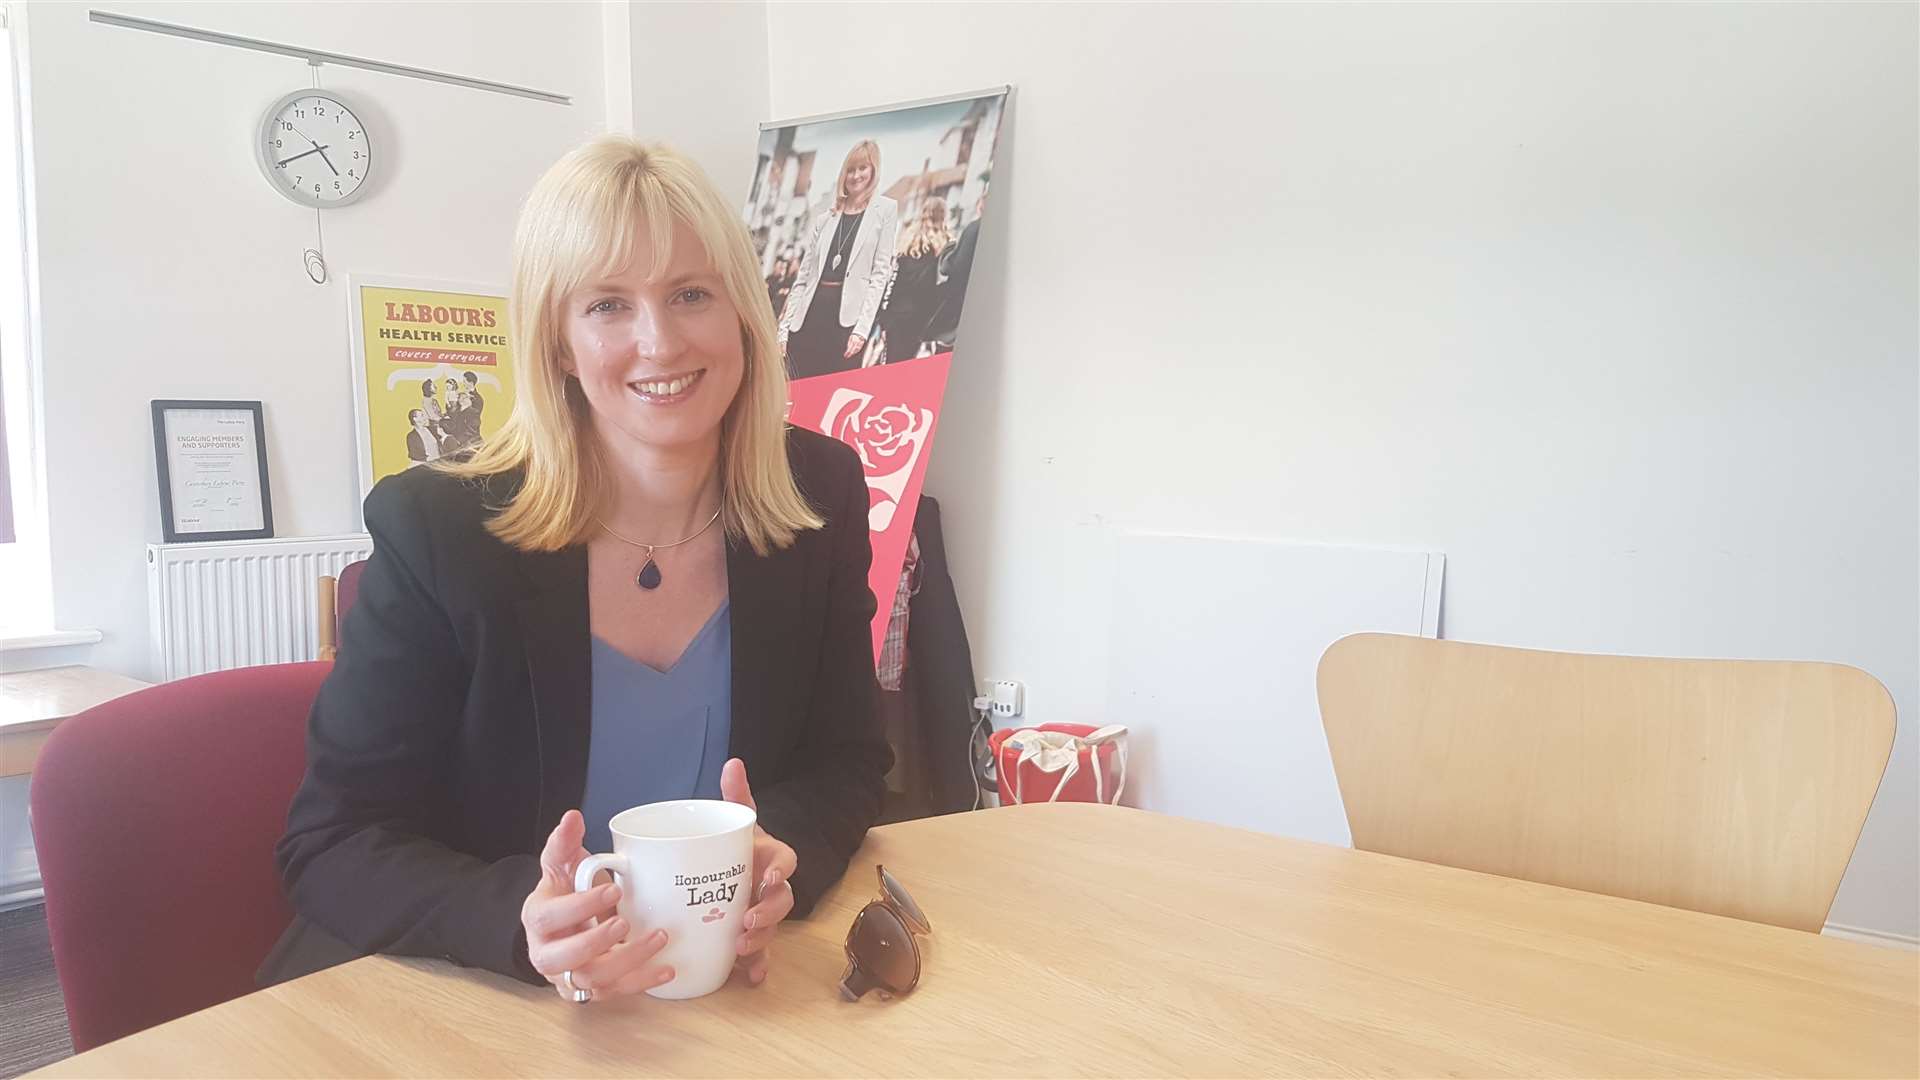 The Lib Dems are stepping aside to get Rosie Duffield more support from voters